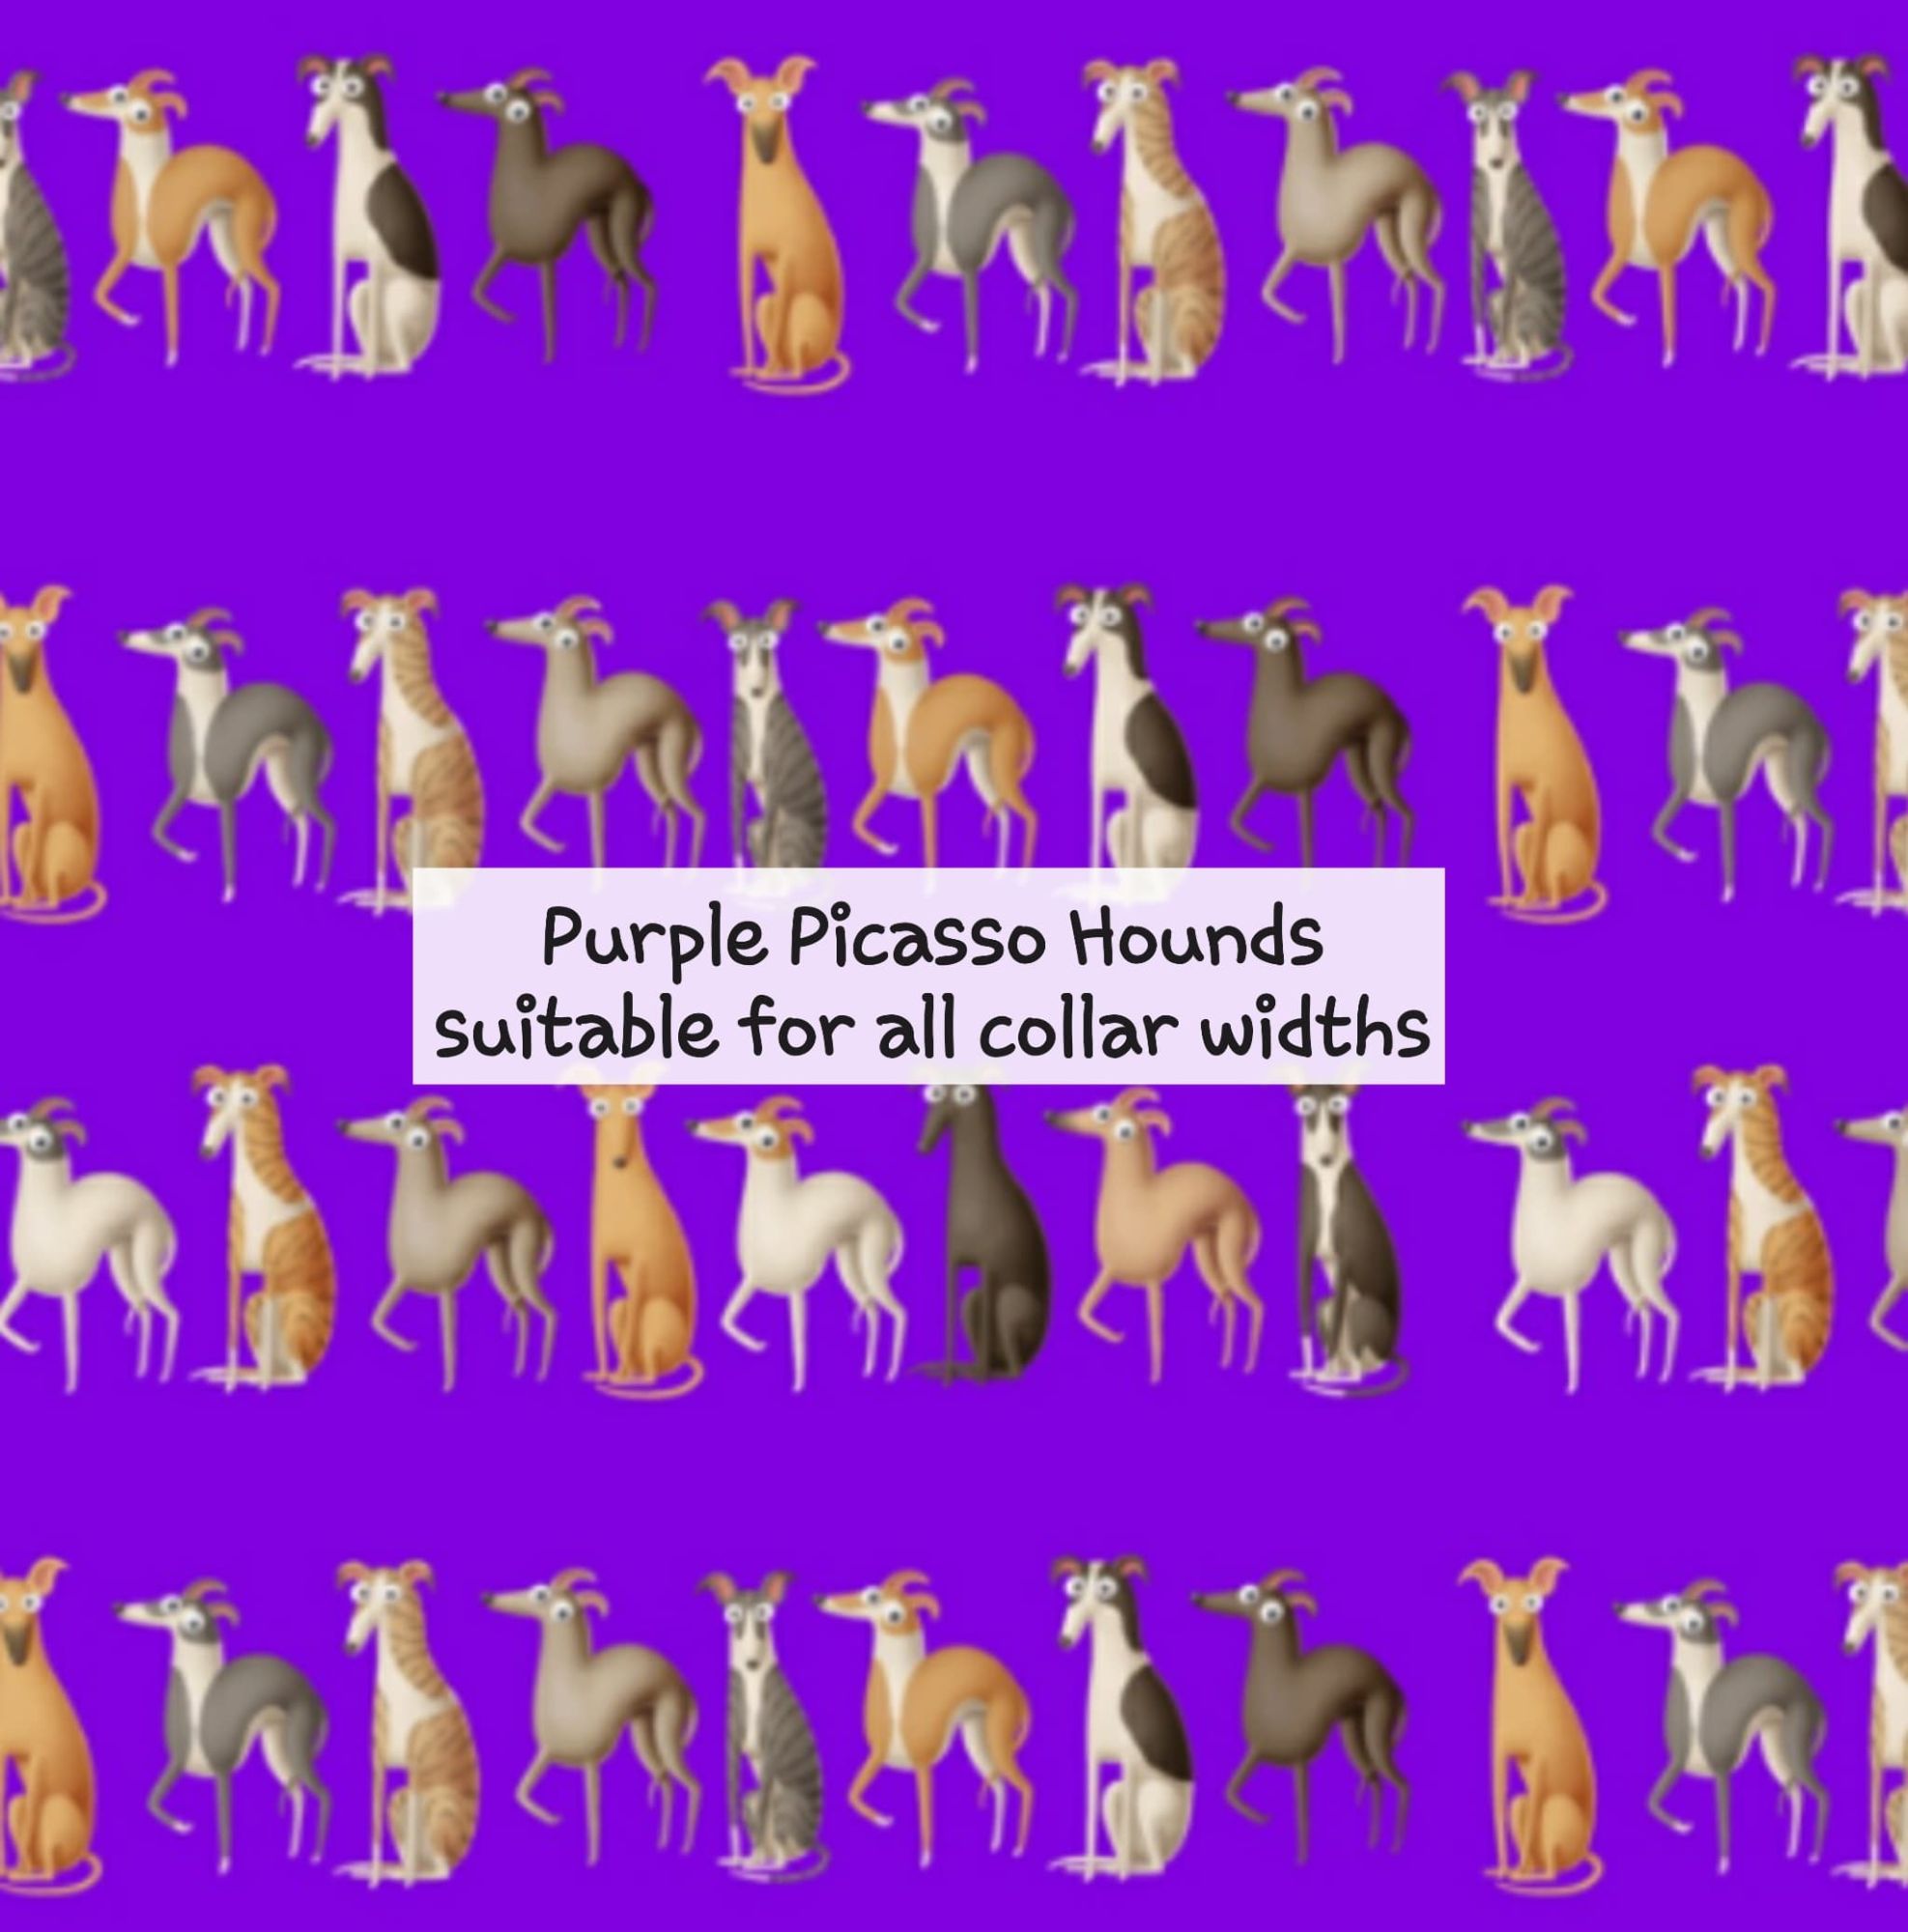 Purple Picasso Hounds - Suitable for all collar widths